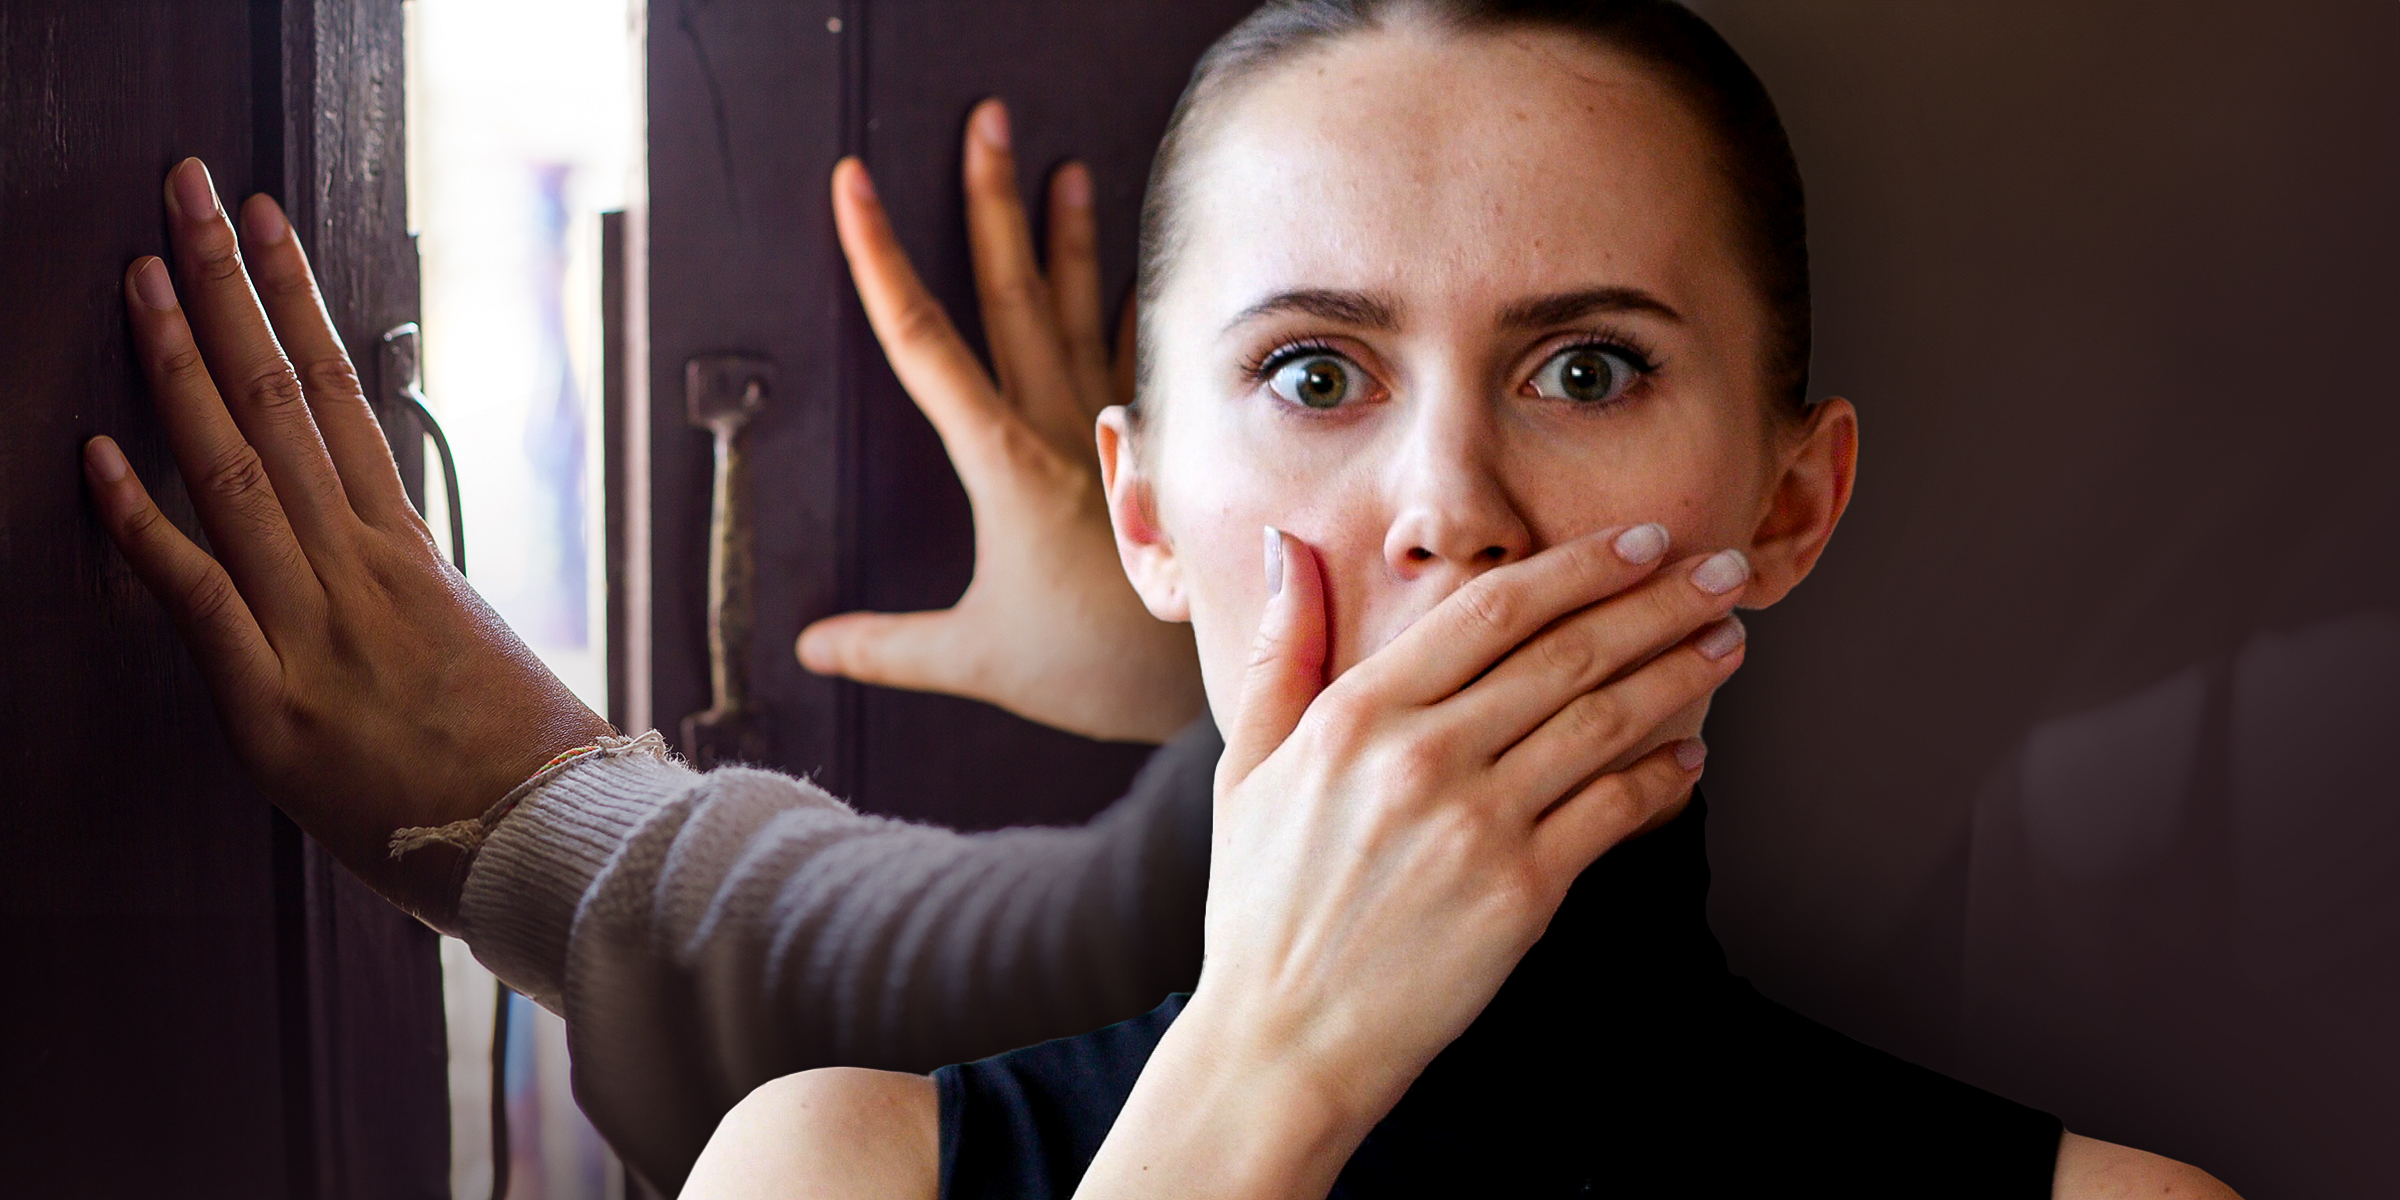 Woman covers her mouth with her hand | Source: Shutterstock